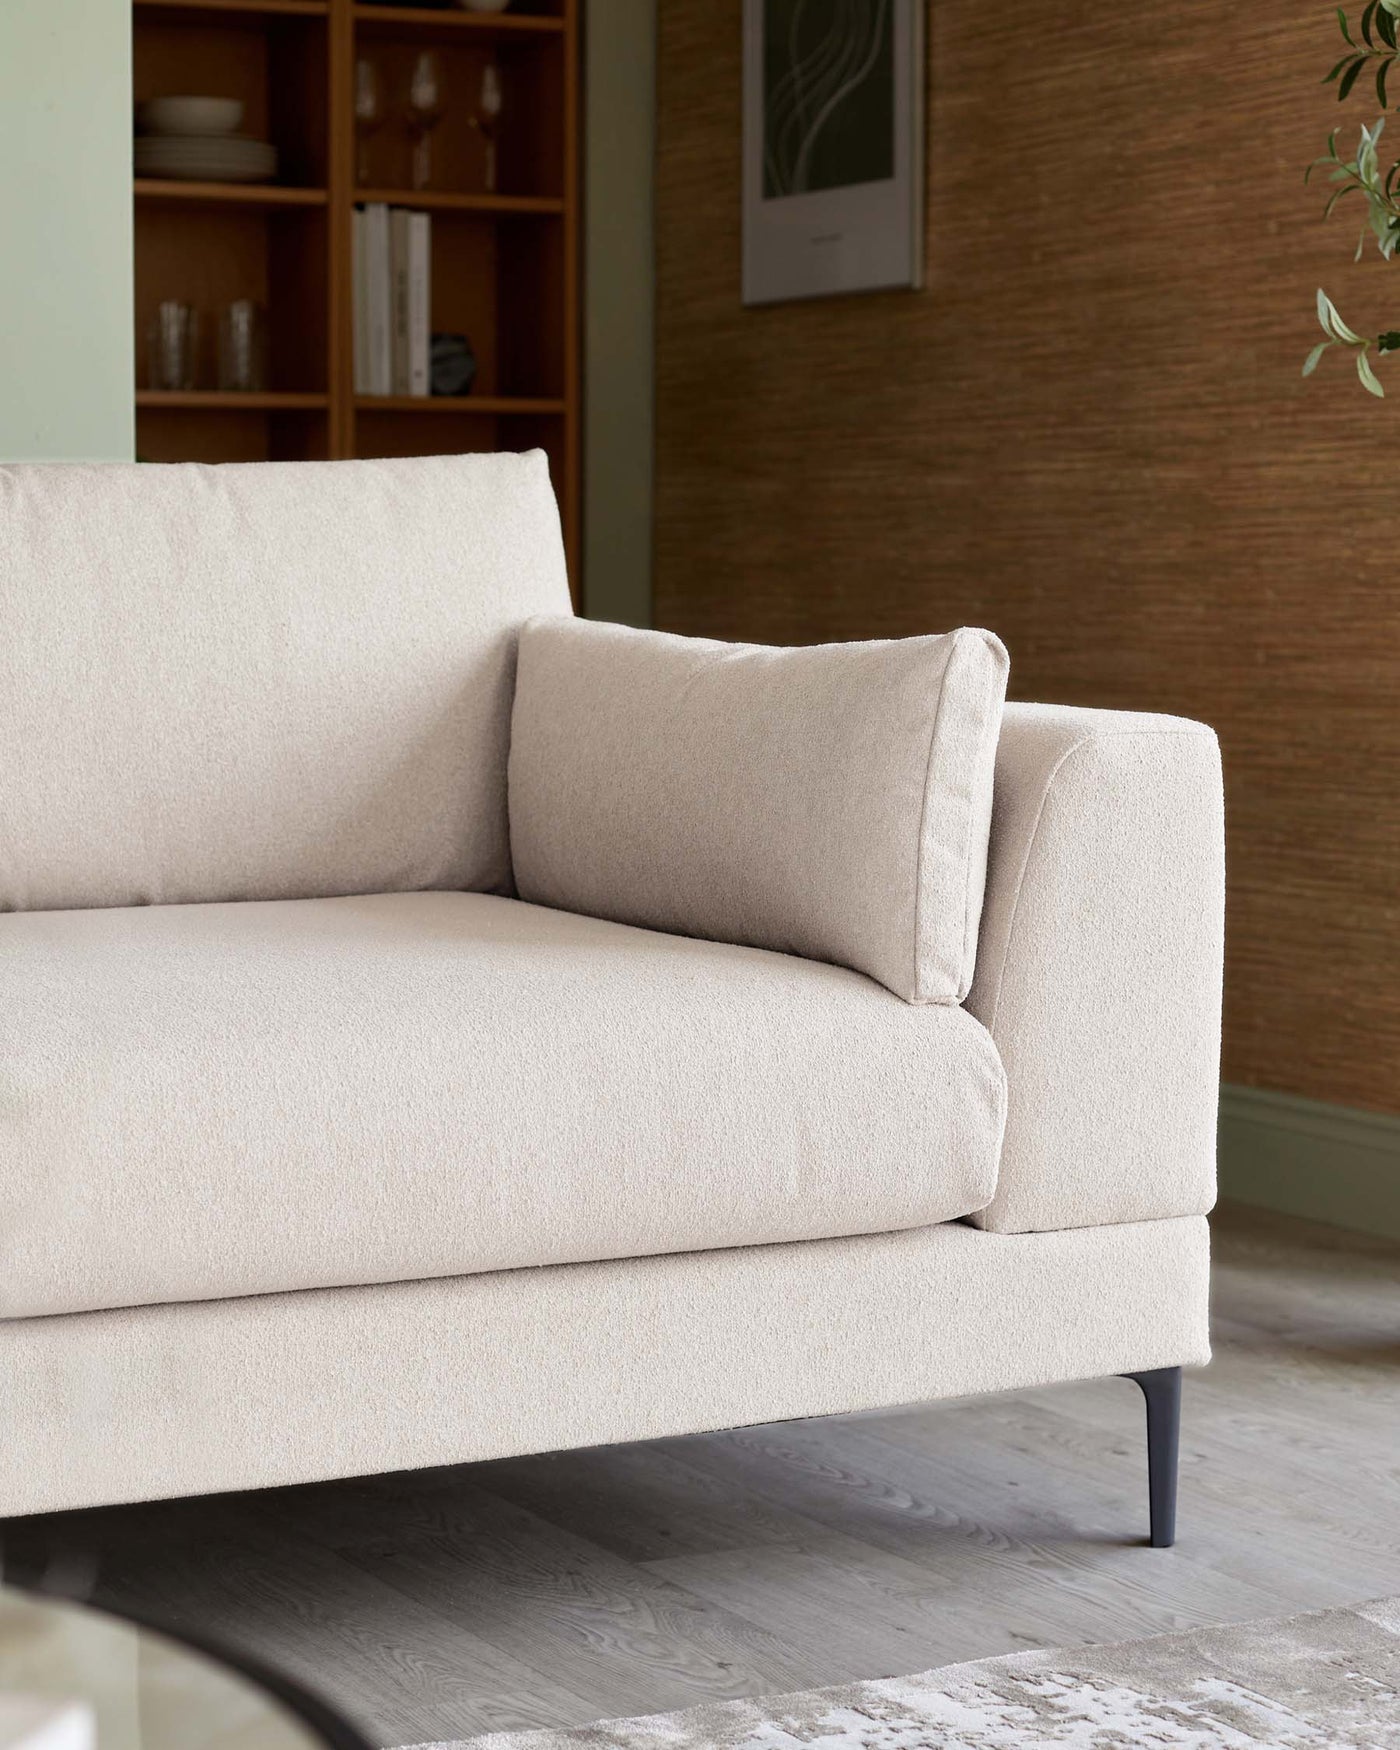 Beige upholstered sofa with a clean and modern design. Features a plush single-seat cushion, cosy back cushion, and a squared-off armrest to the left. The sofa is raised on slender black metal legs, providing a light and airy feel. The background includes a wood cabinet with glassware and books, set against a textured wallpapered wall with a mounted framed artwork and accented with a green plant.